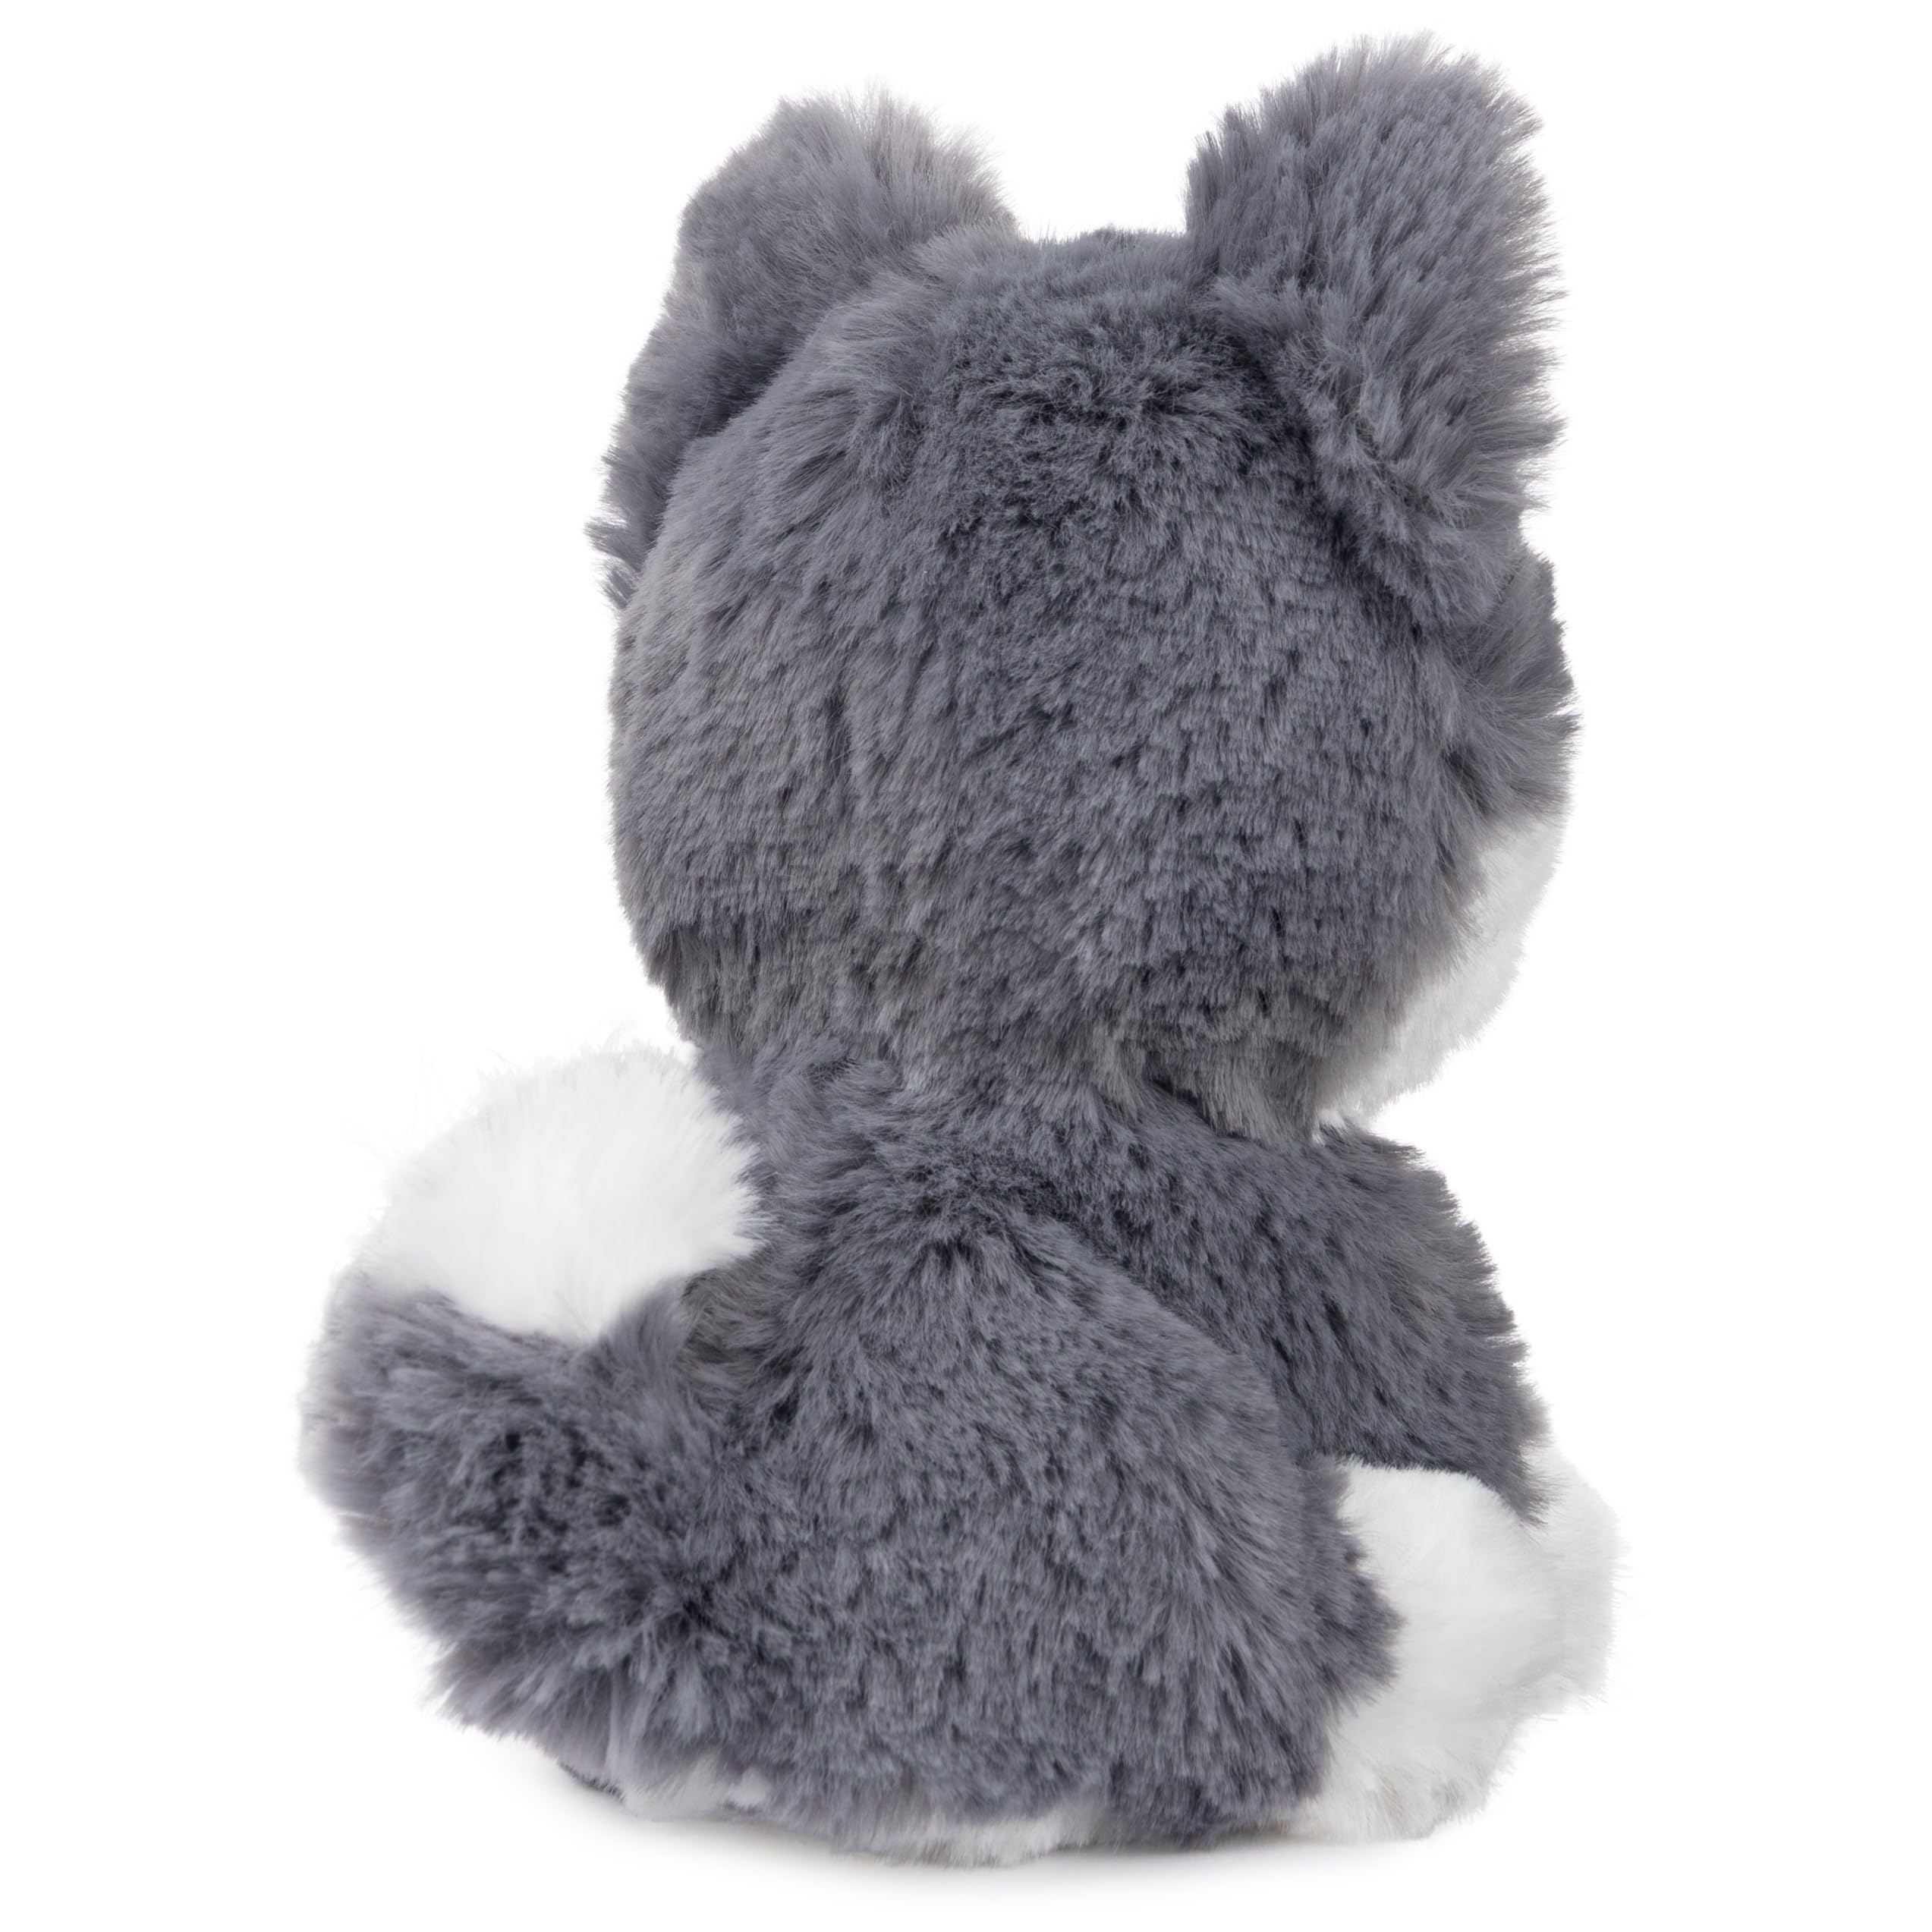 GUND Boo, The World's Cutest Dog, Boo & Friends Collection